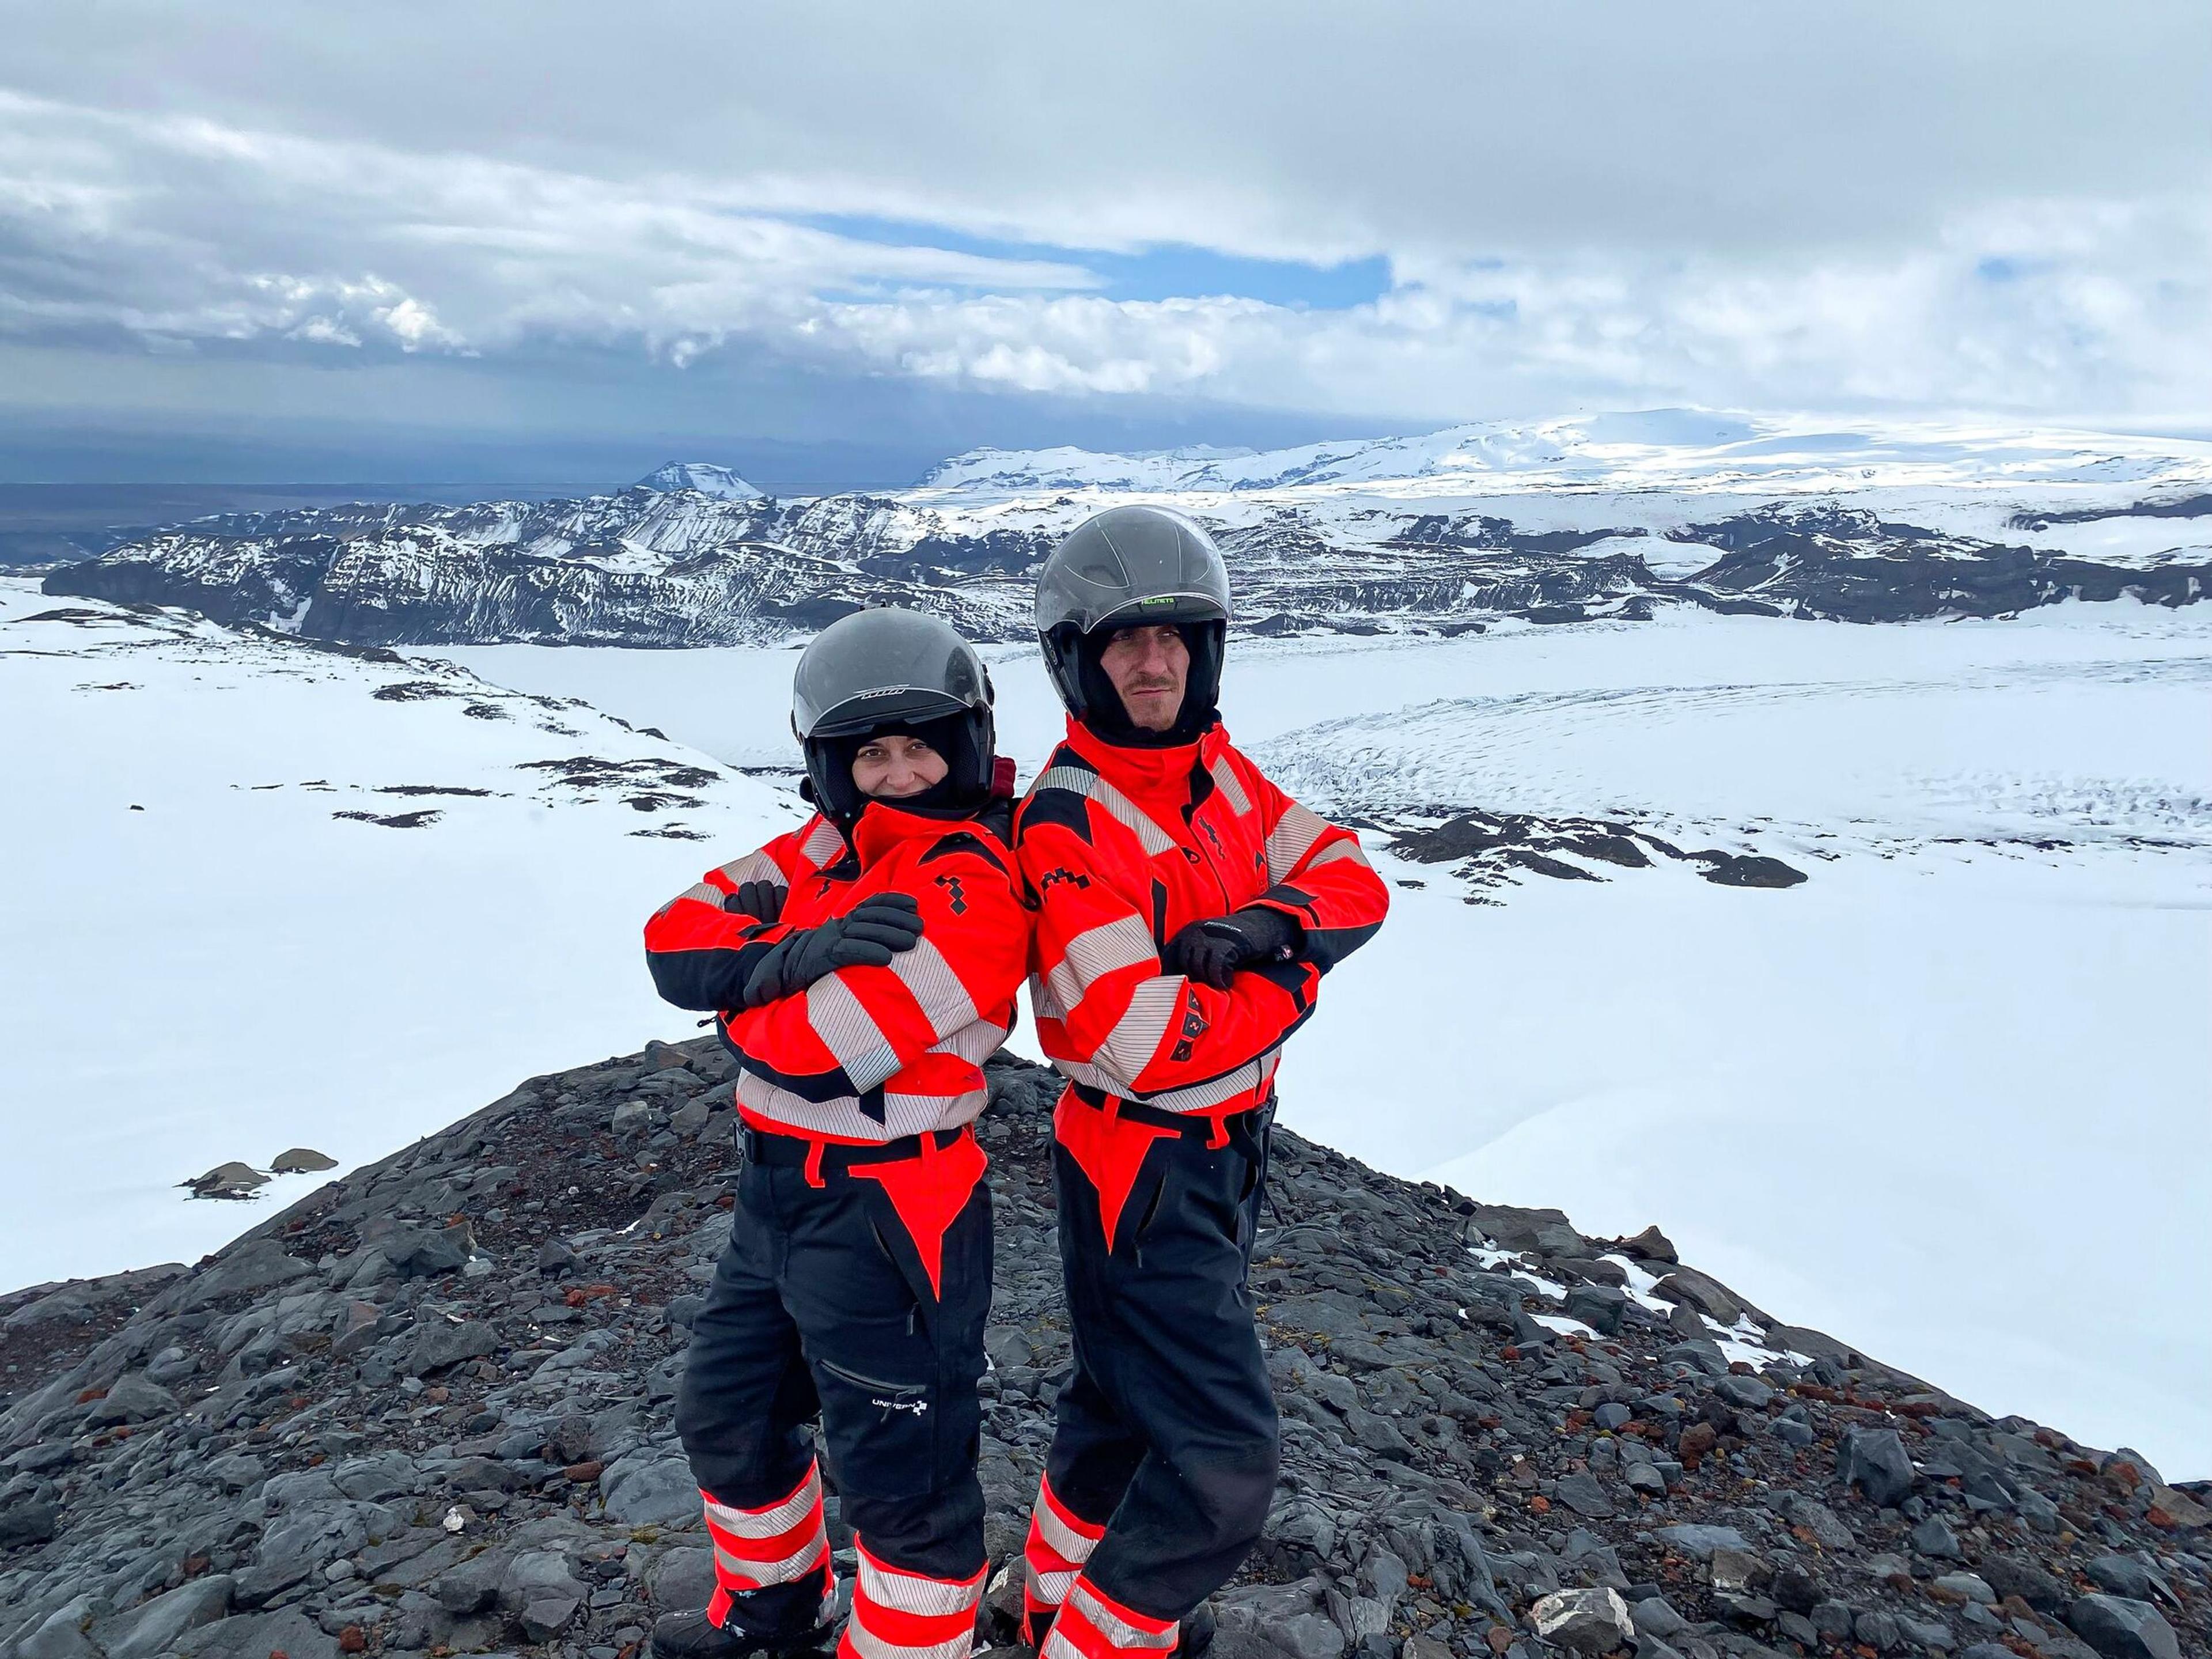 Two people in orange safety suits and helmets taking standing on a snowy overlook with mountains in the distance.